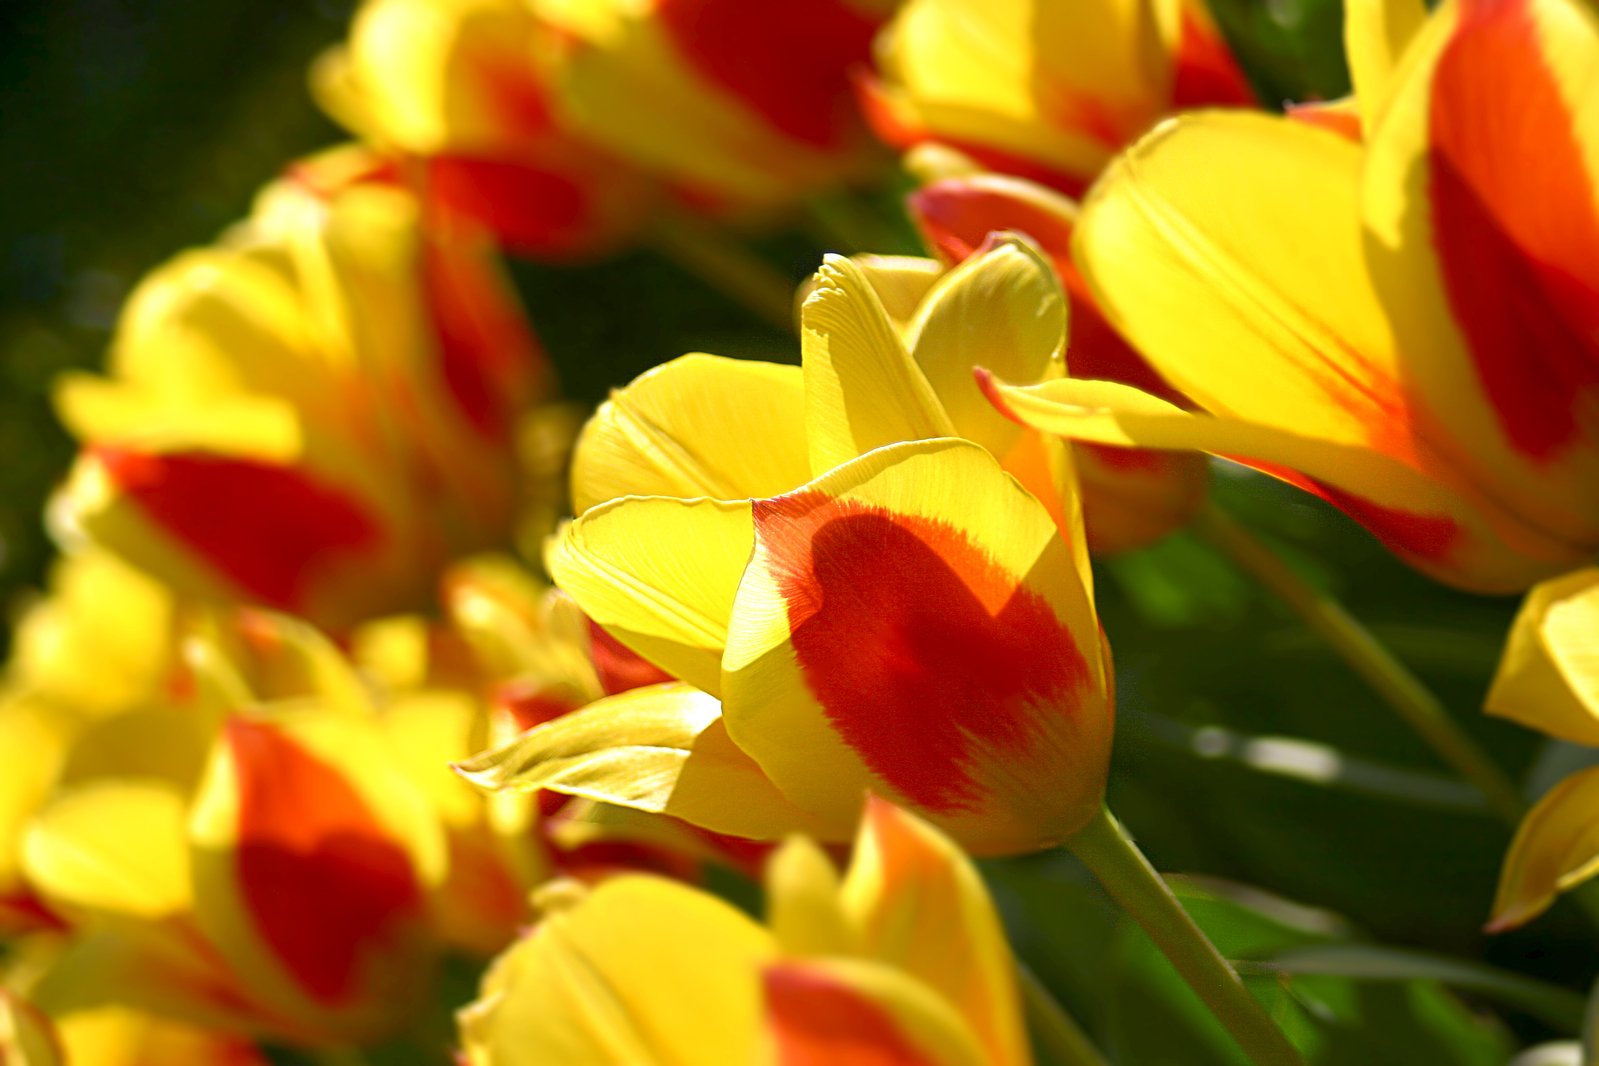 yellow and red flowers growing outside in the sun